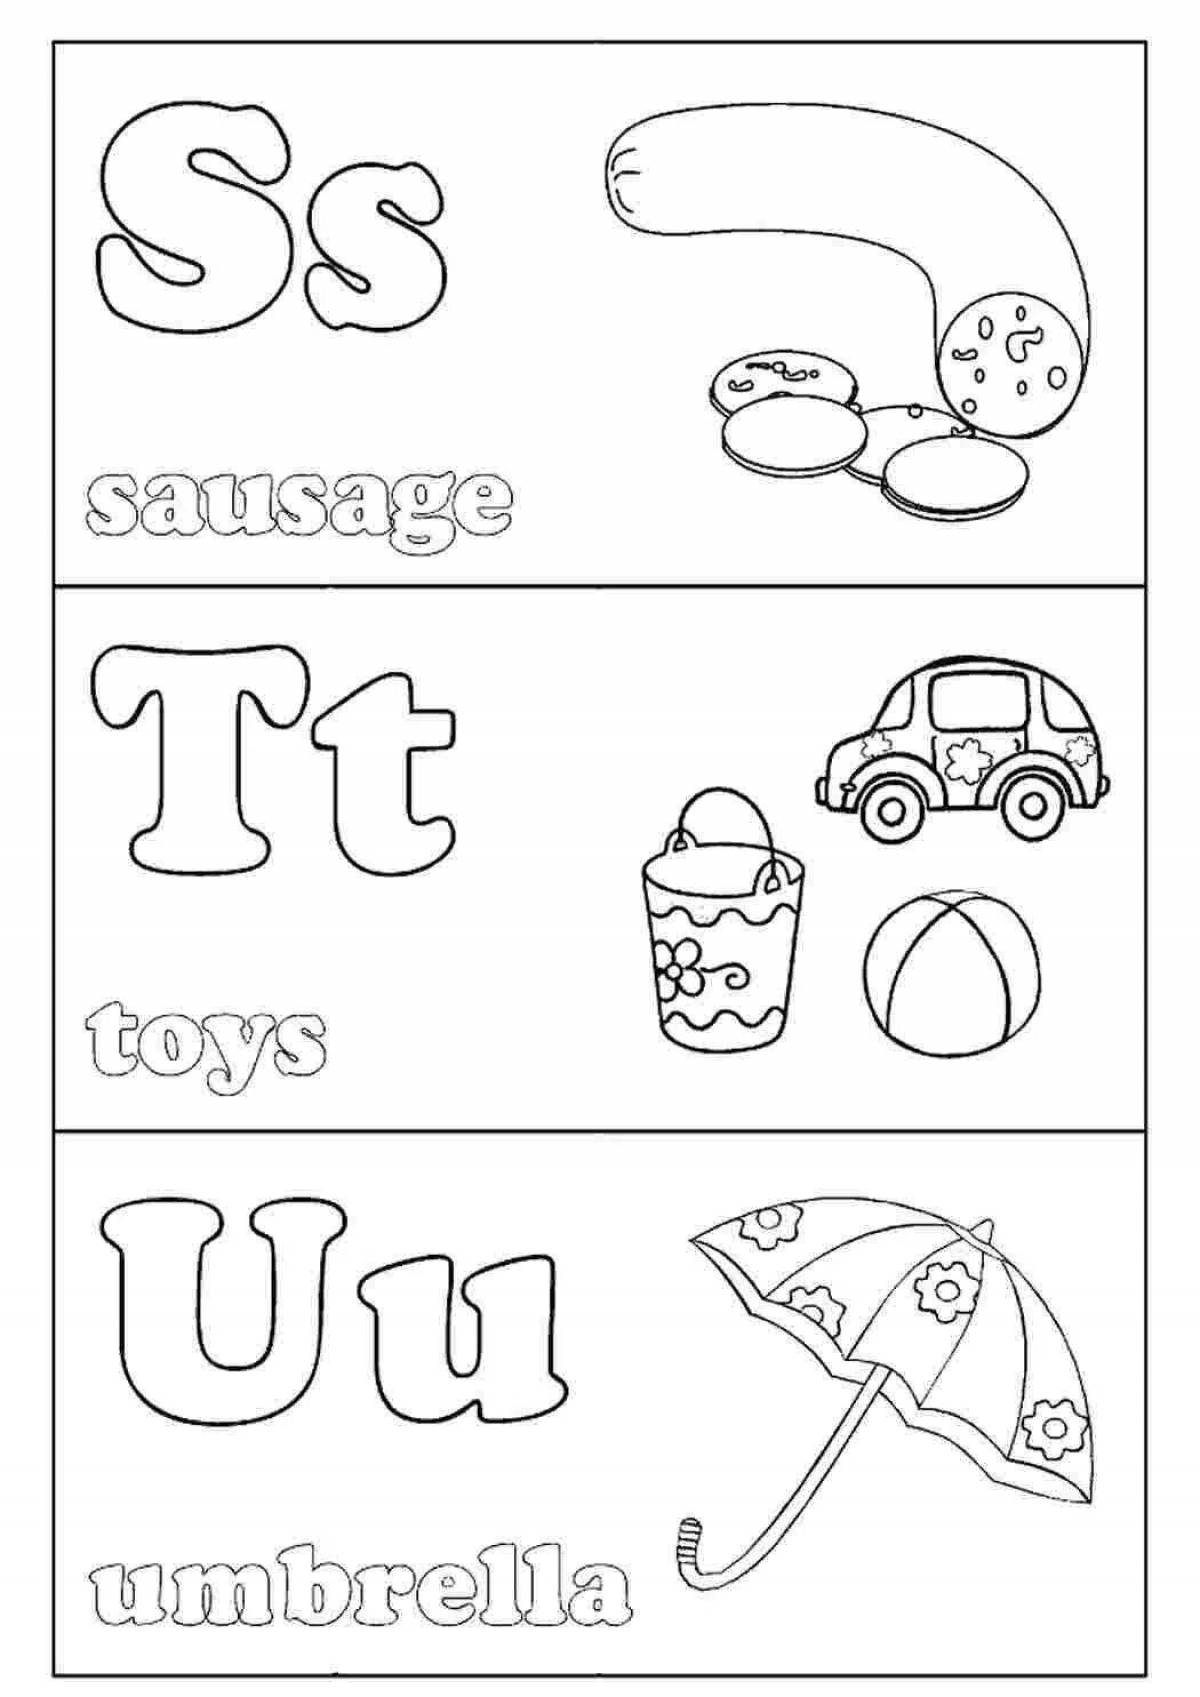 Colorful english alphabet coloring page for kids of all ages